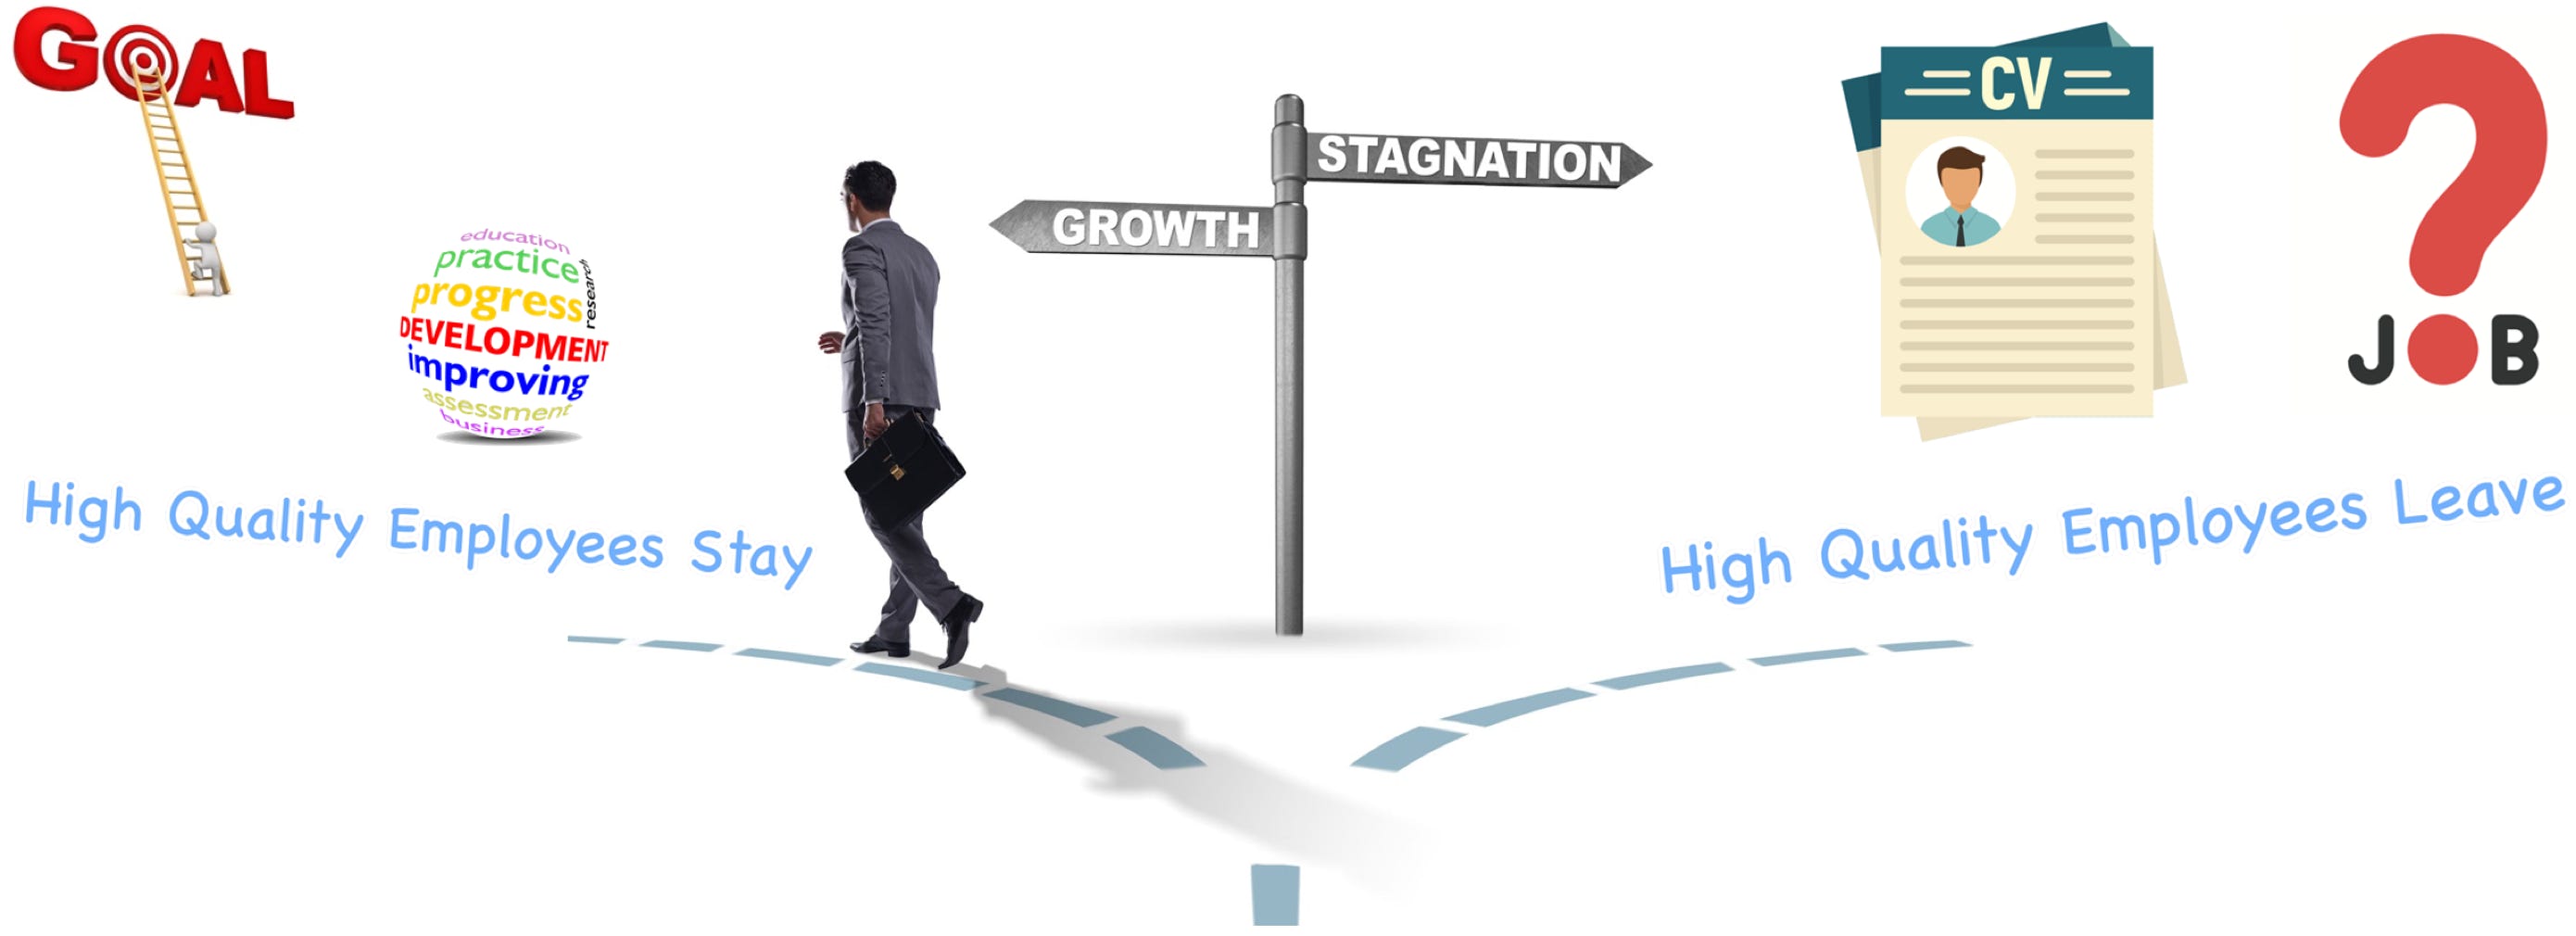 The heading image showing a person who has chosen the left hand fork on the road leading to "Growth"  which leads to Development, Goals and High Quality Employees Staying. The other fork to the right shows Stagnation which leads to CV writing, jobs and High Quality Employees Leaving. 